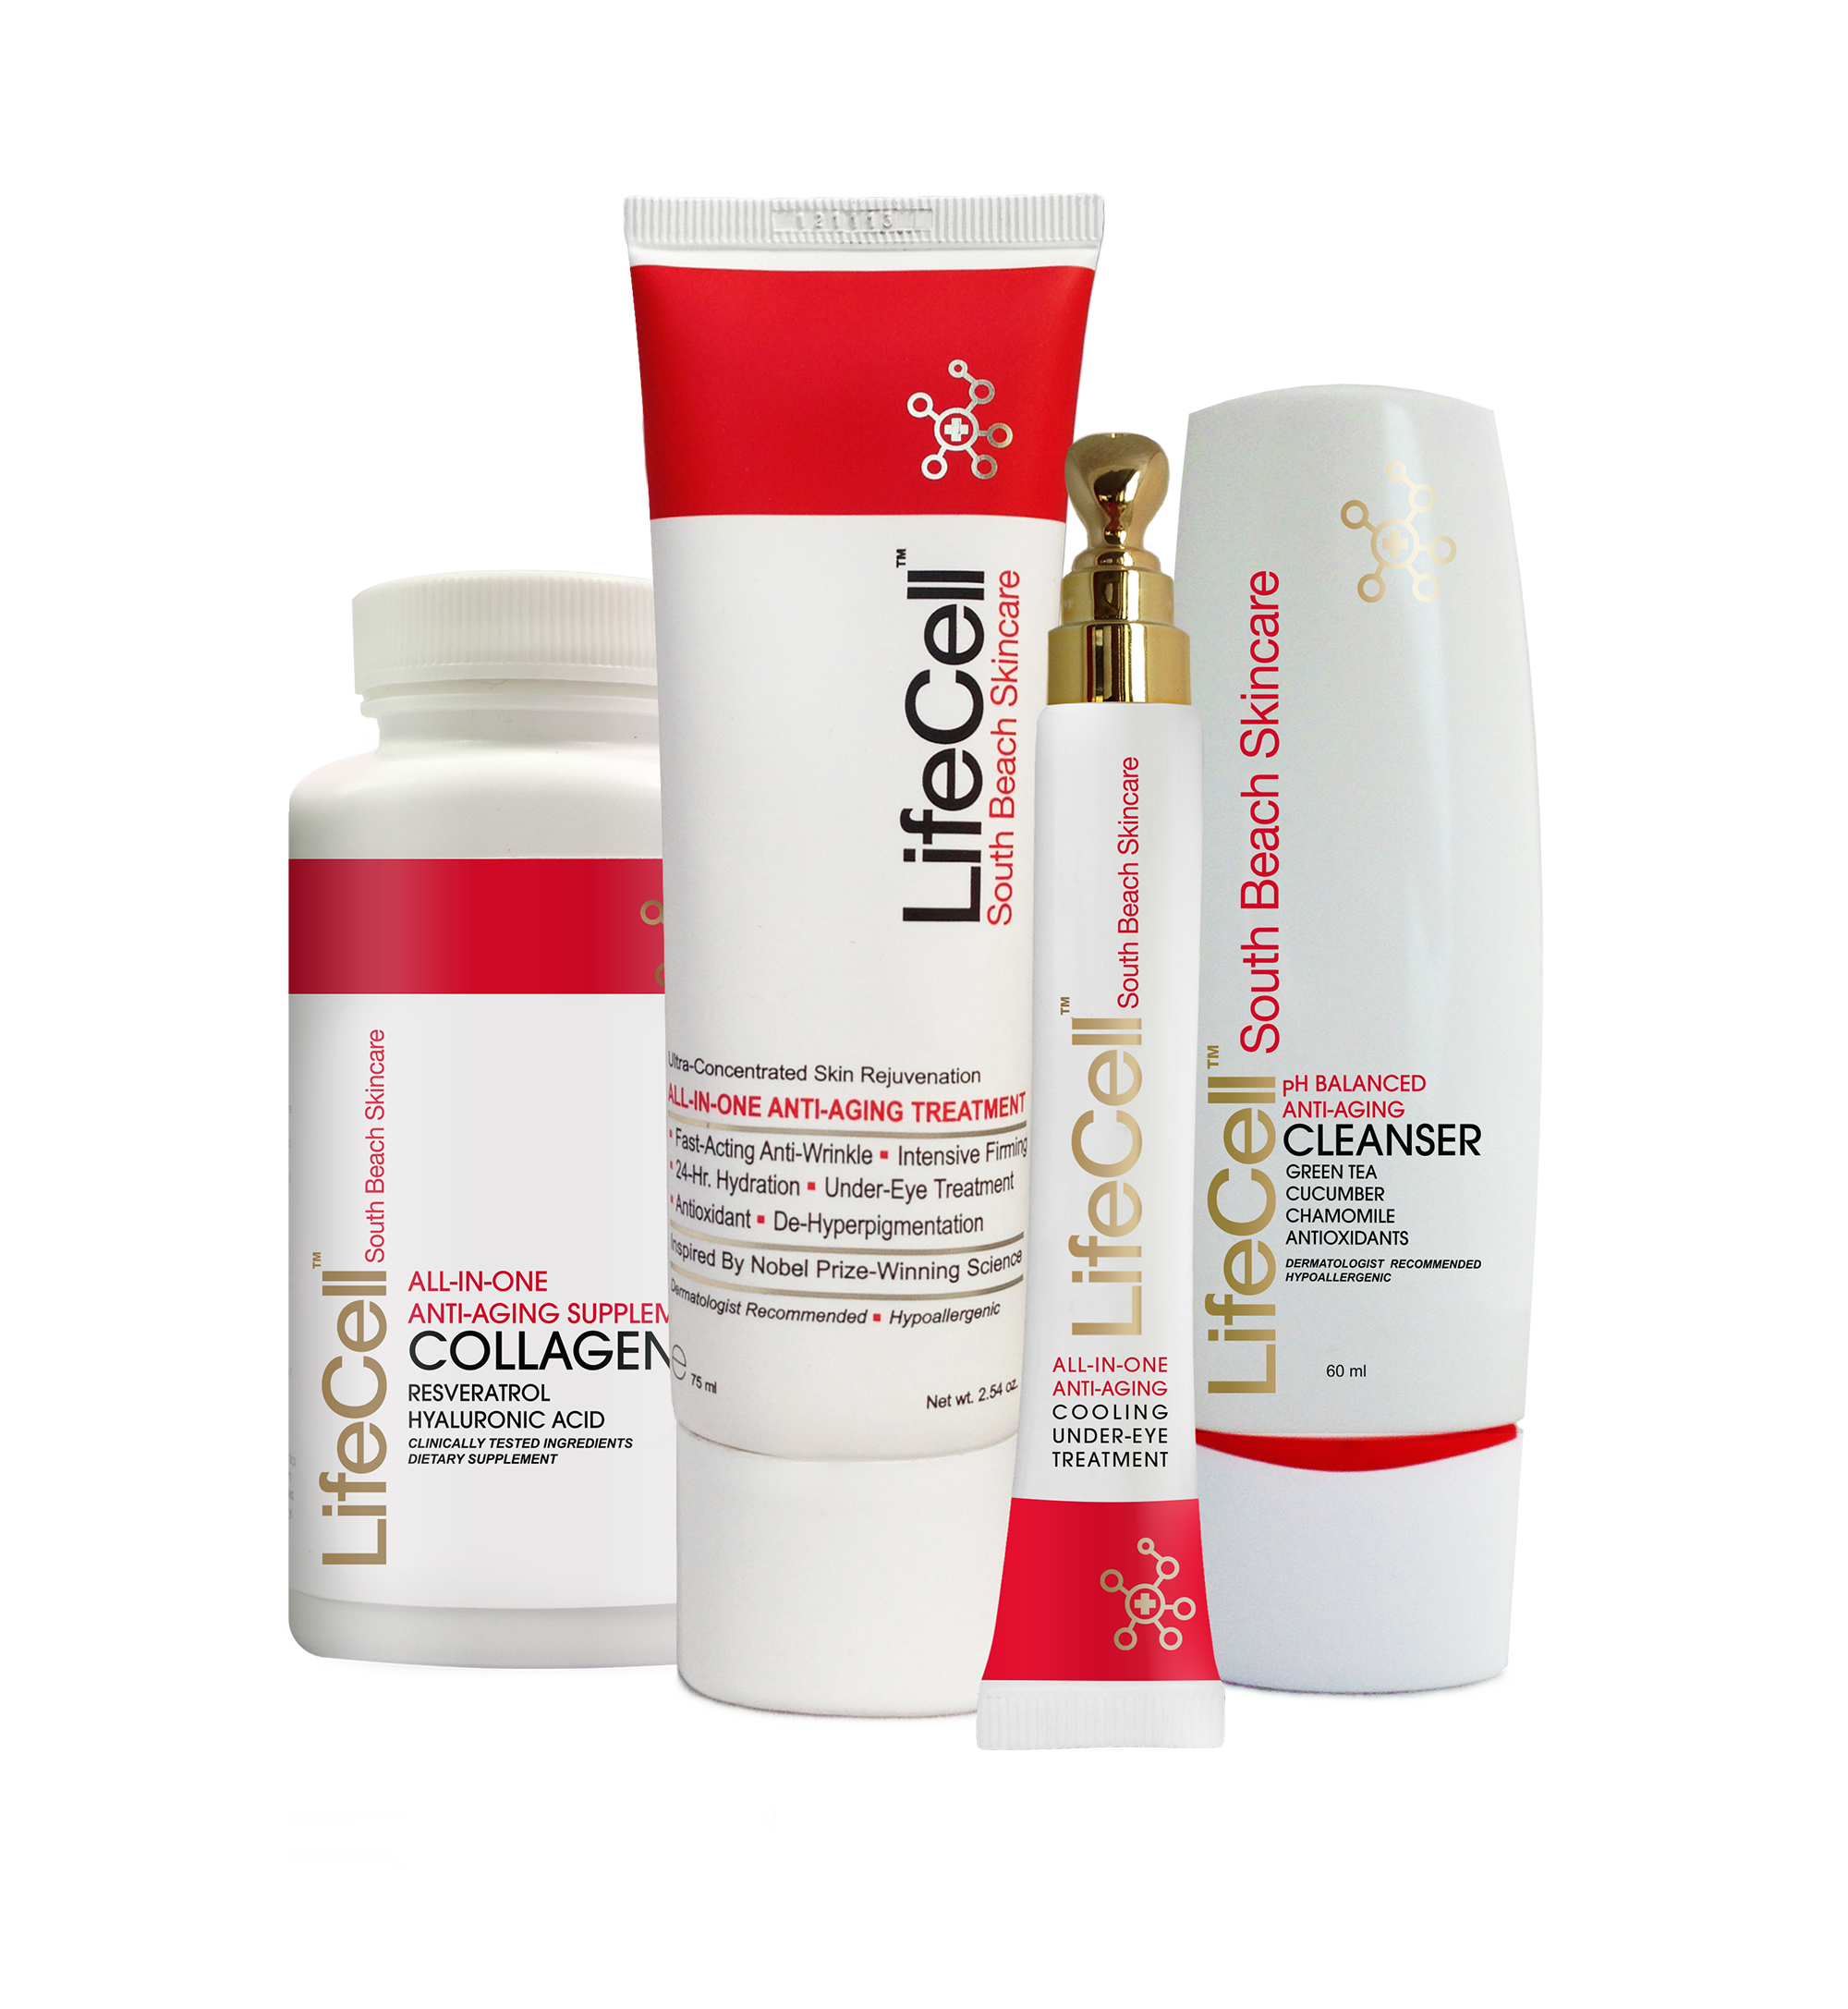 LifeCell Skin Care Products